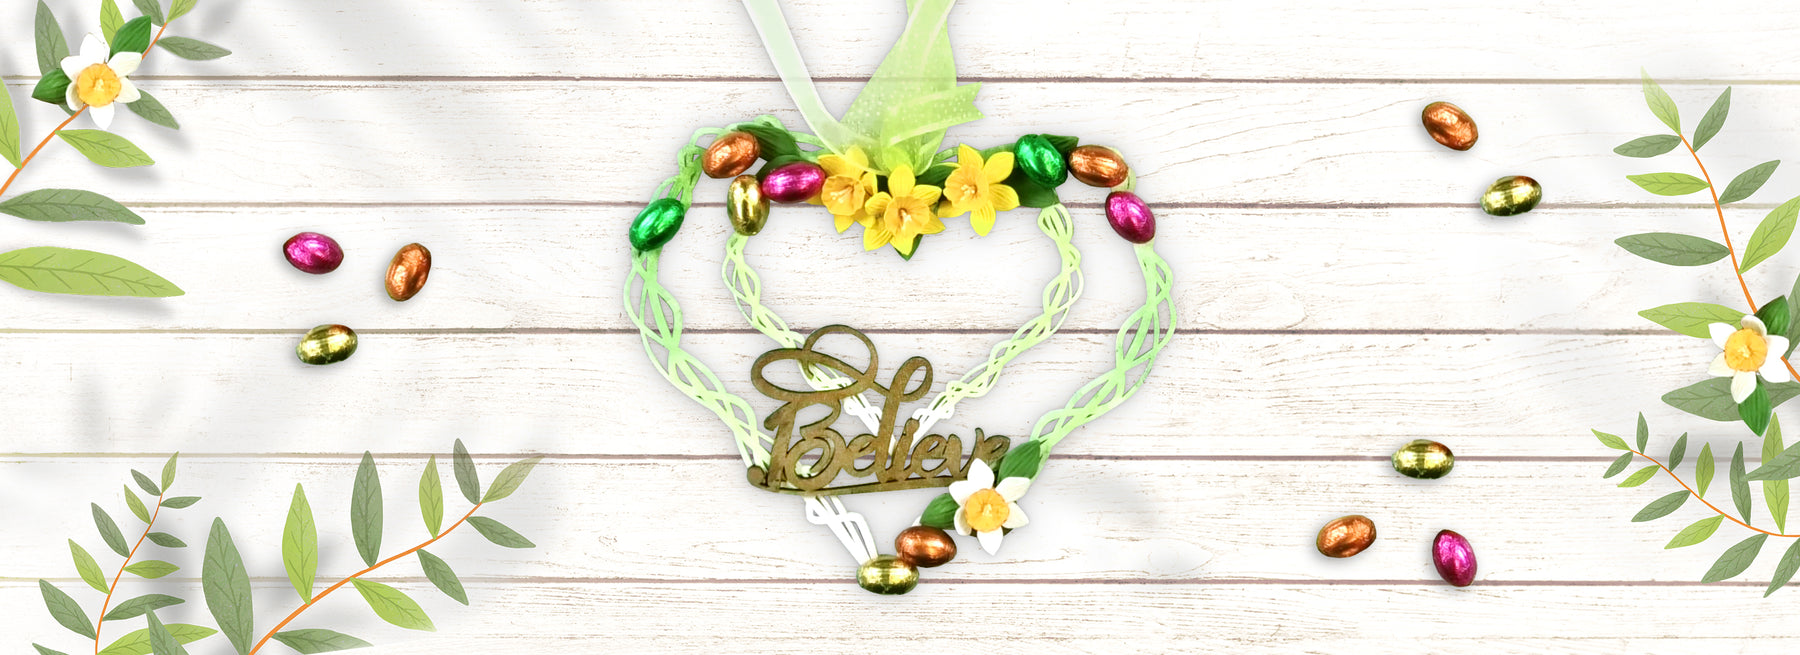 Spring Wreath Craft Project